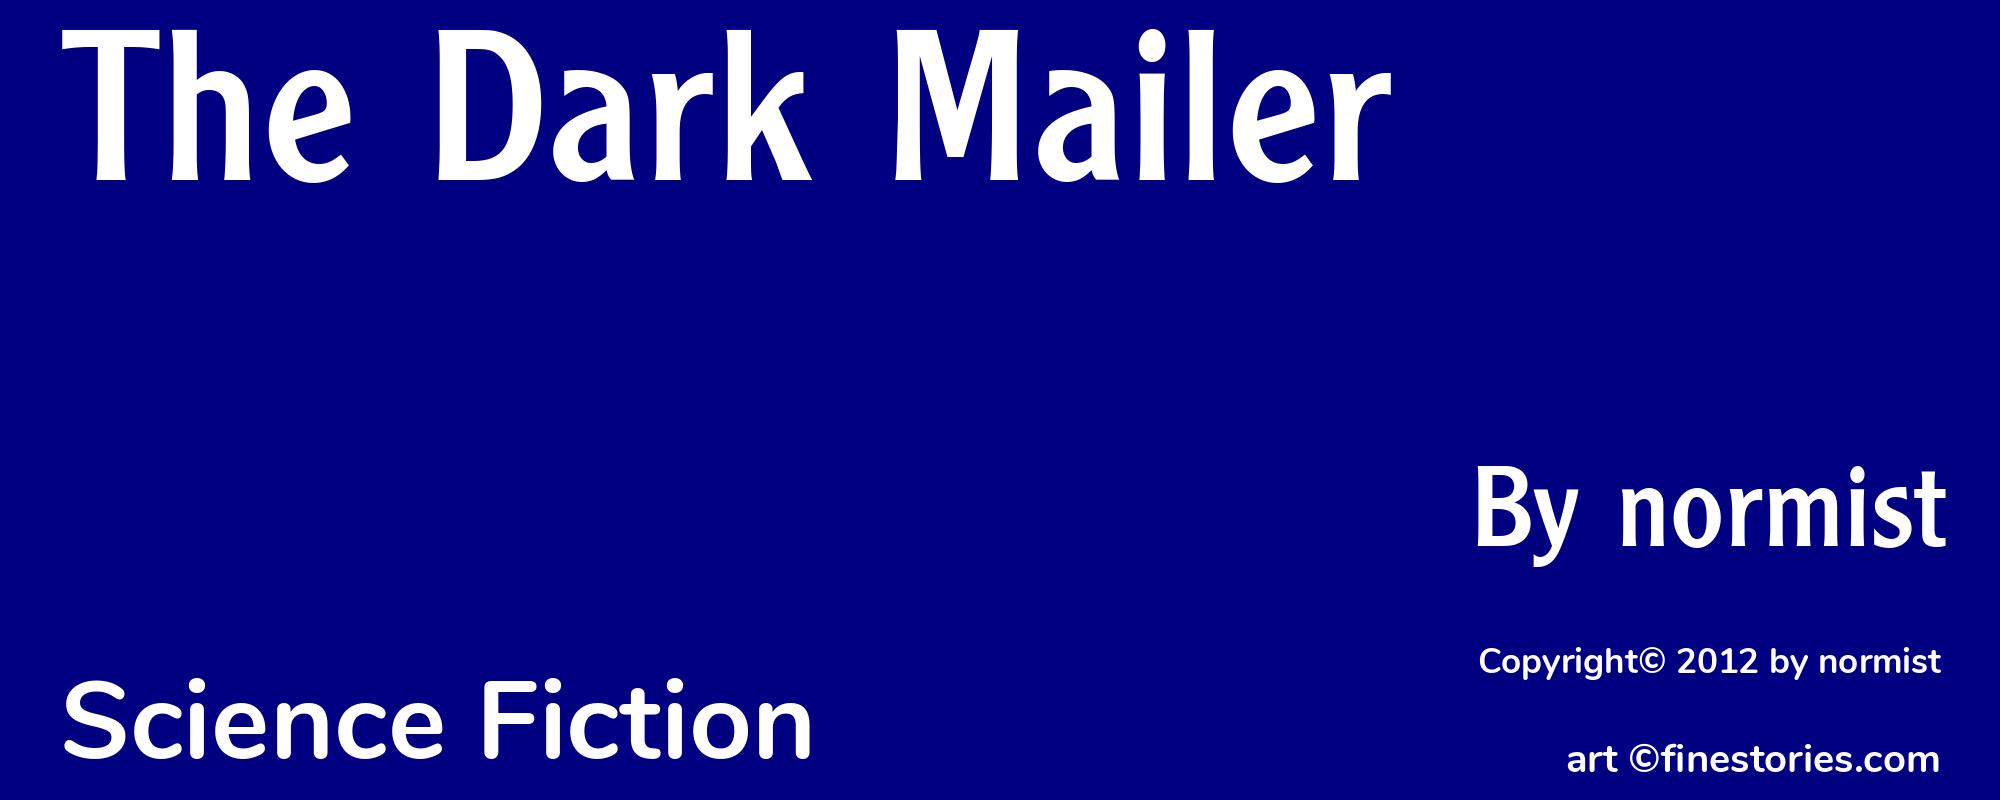 The Dark Mailer - Cover